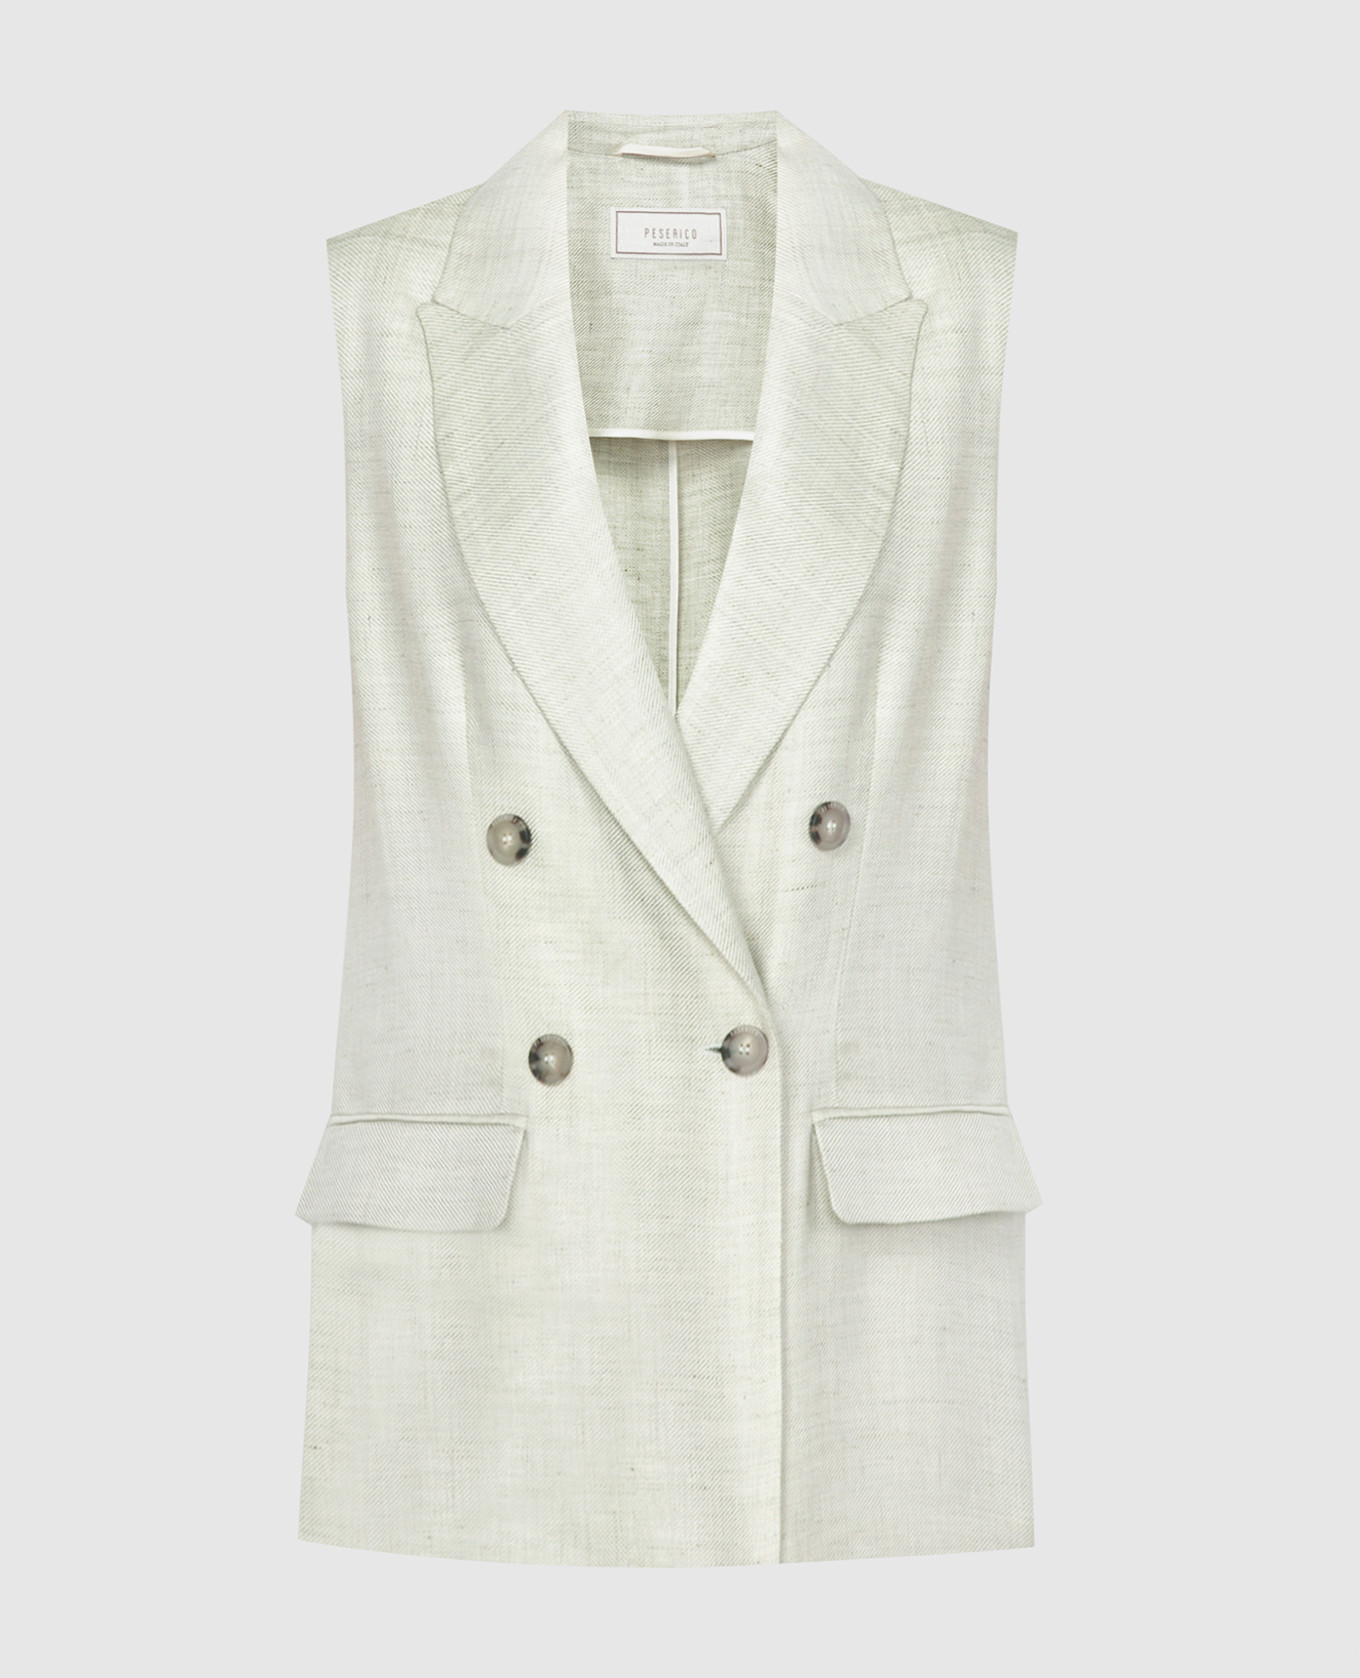 Green double-breasted waistcoat with linen